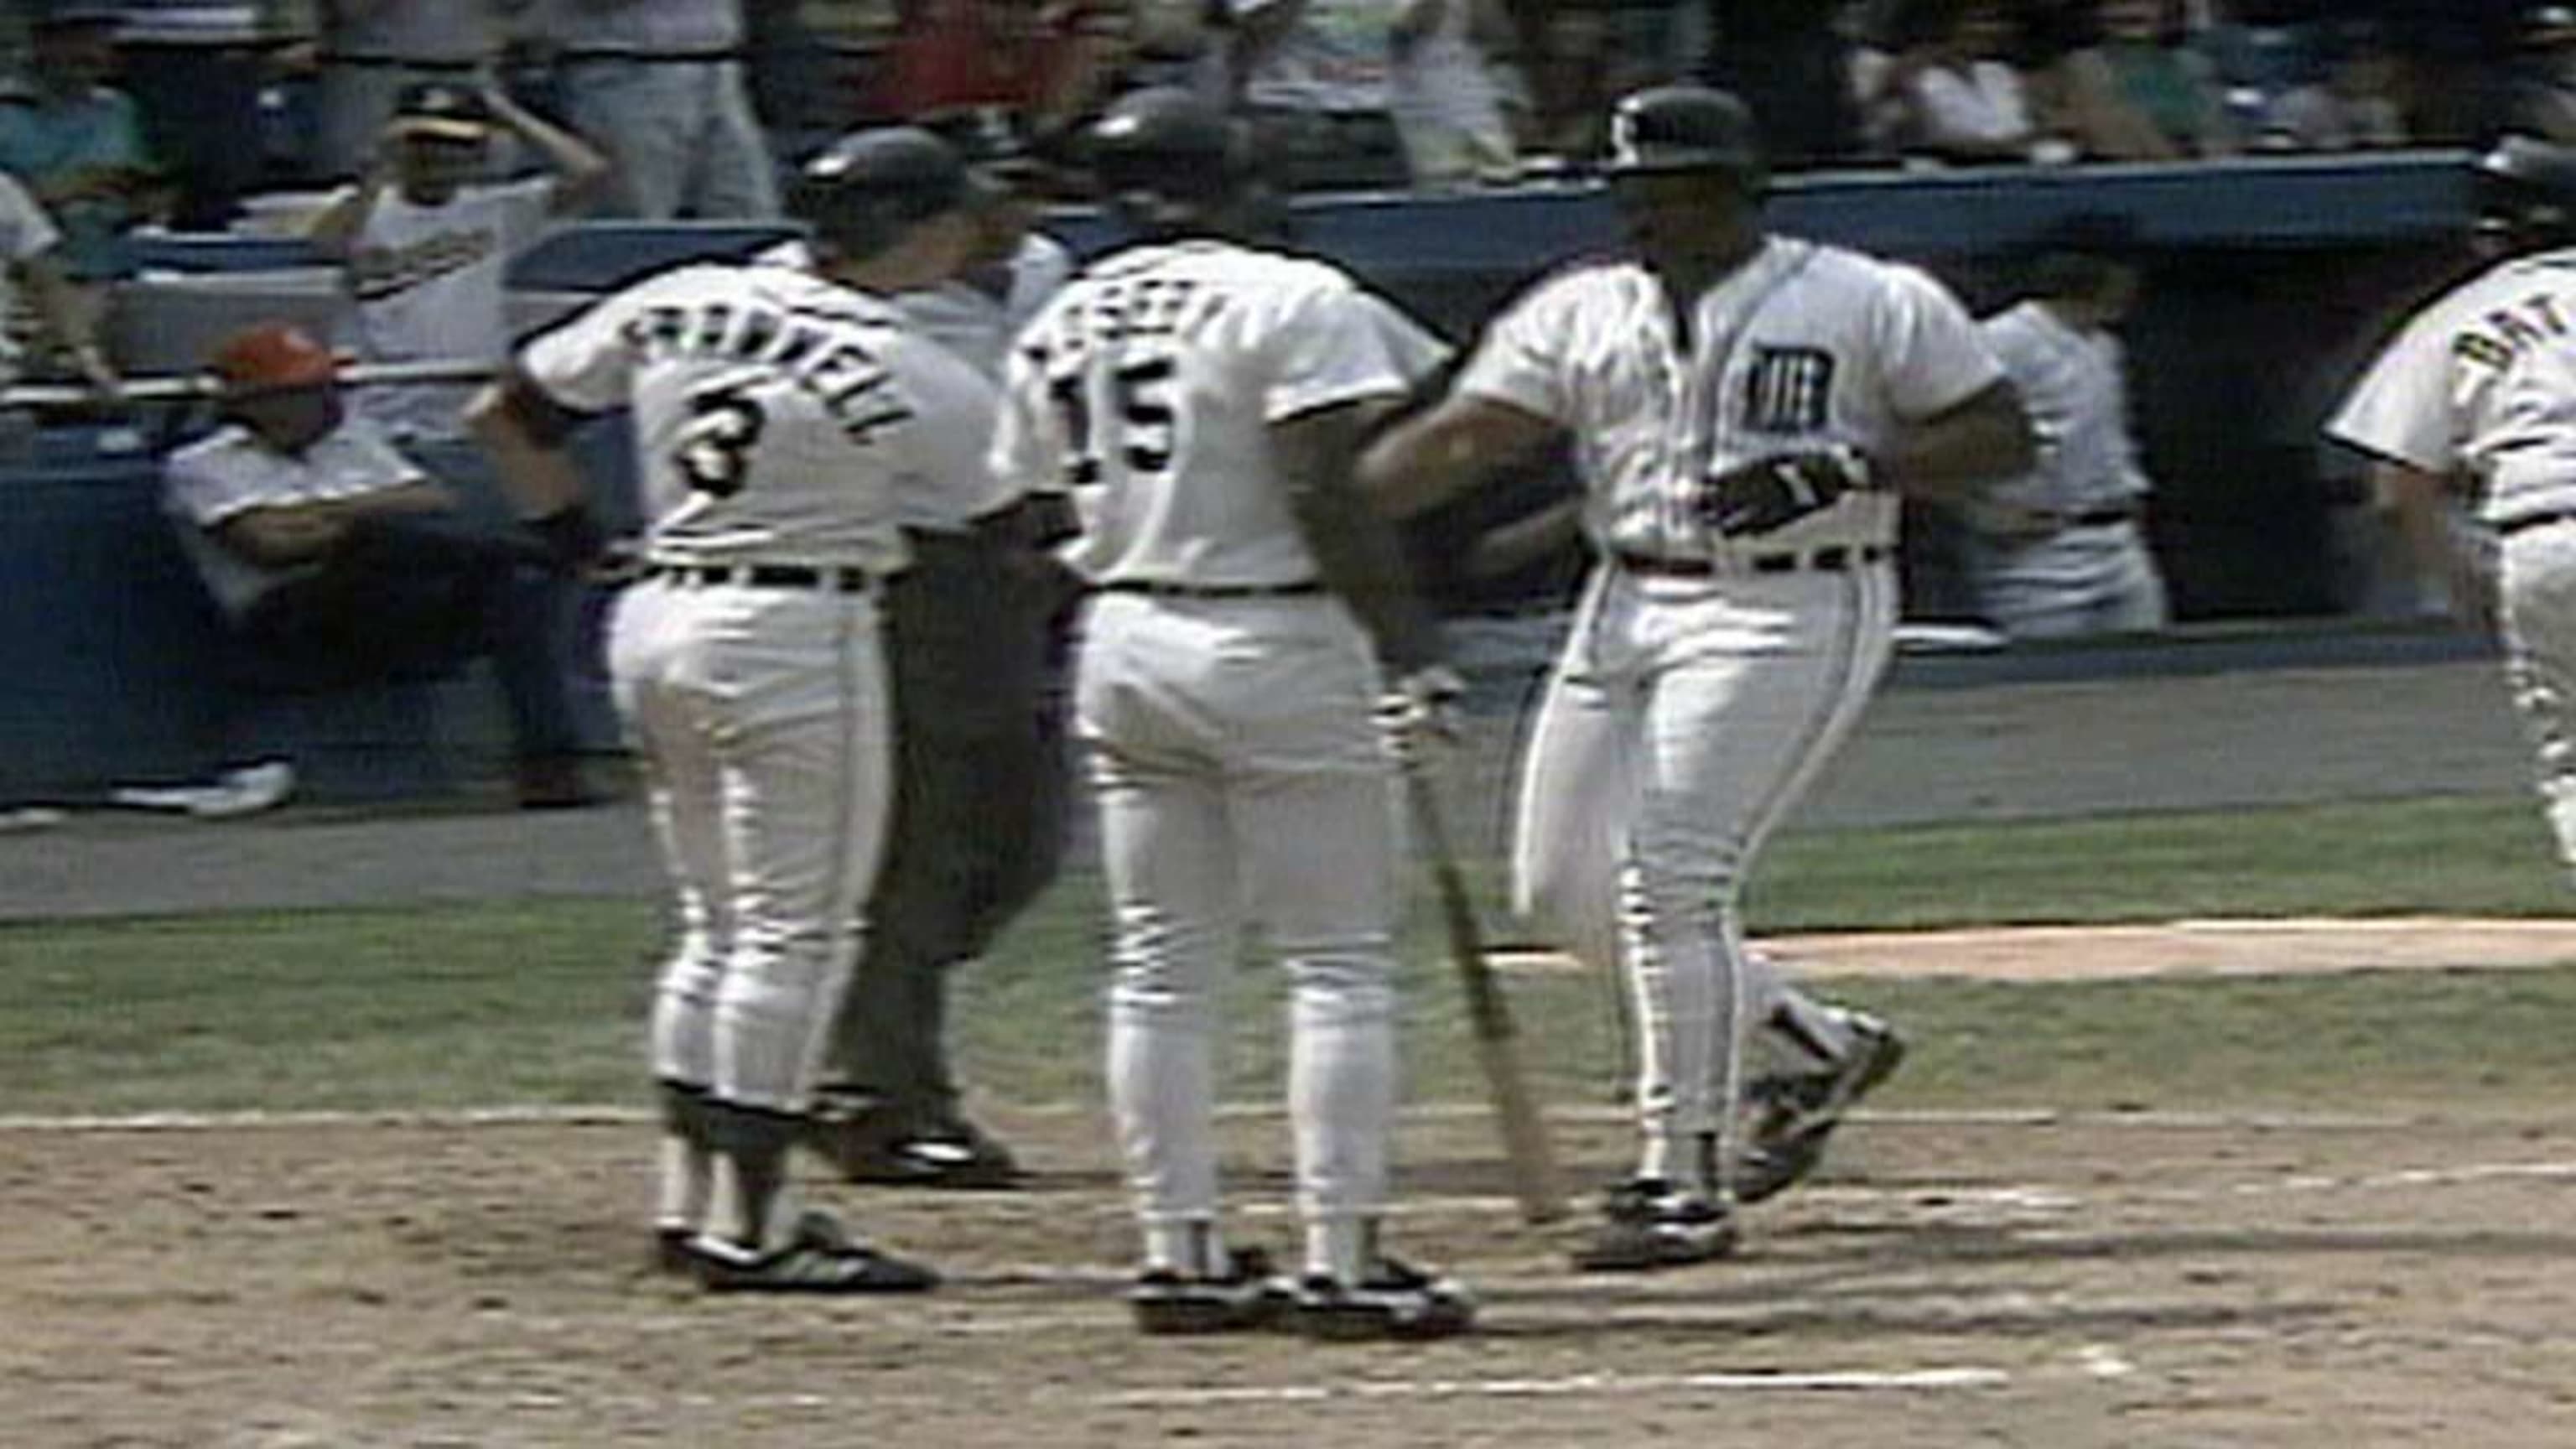 Cecil Fielder Stats & Facts - This Day In Baseball